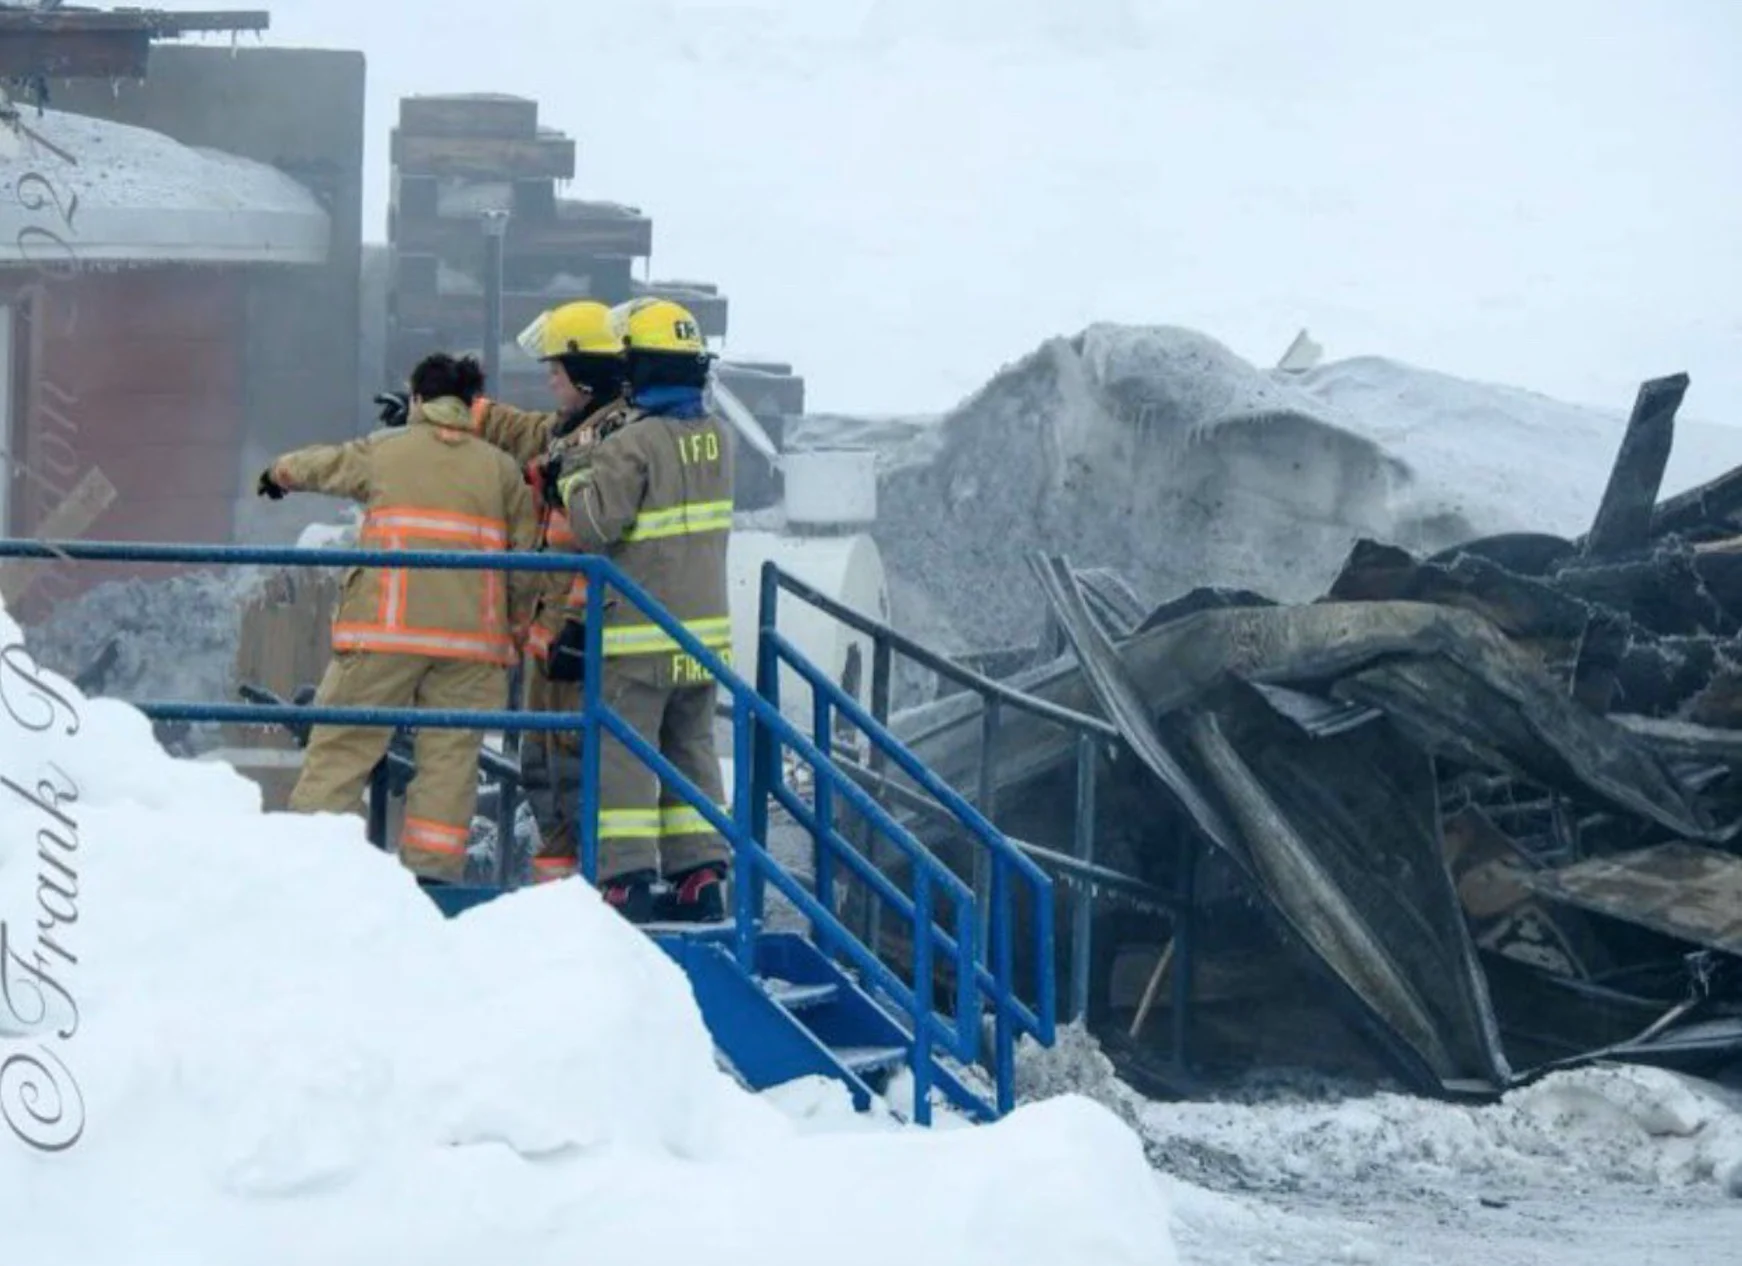 Submitted via Frank Reardon: Iqaluit fire aftermath